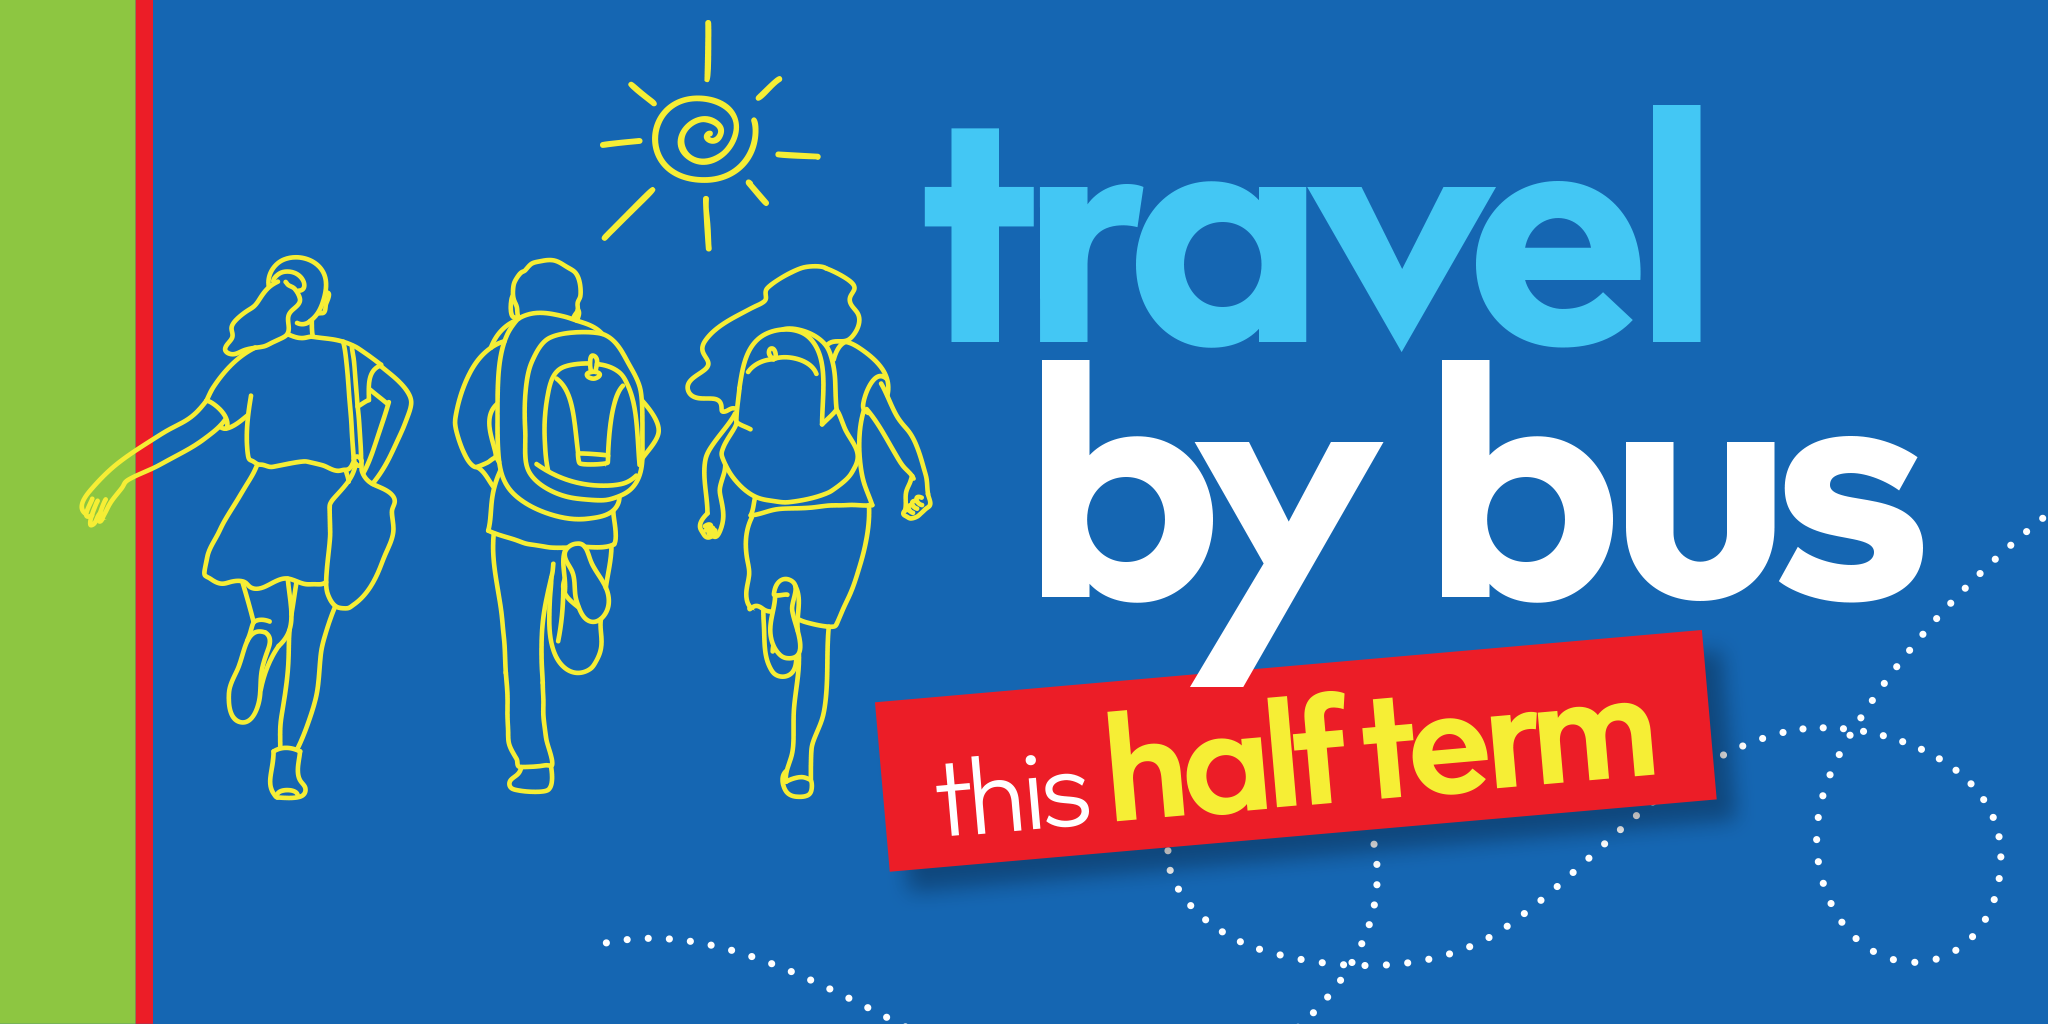 travel by bus this half term image